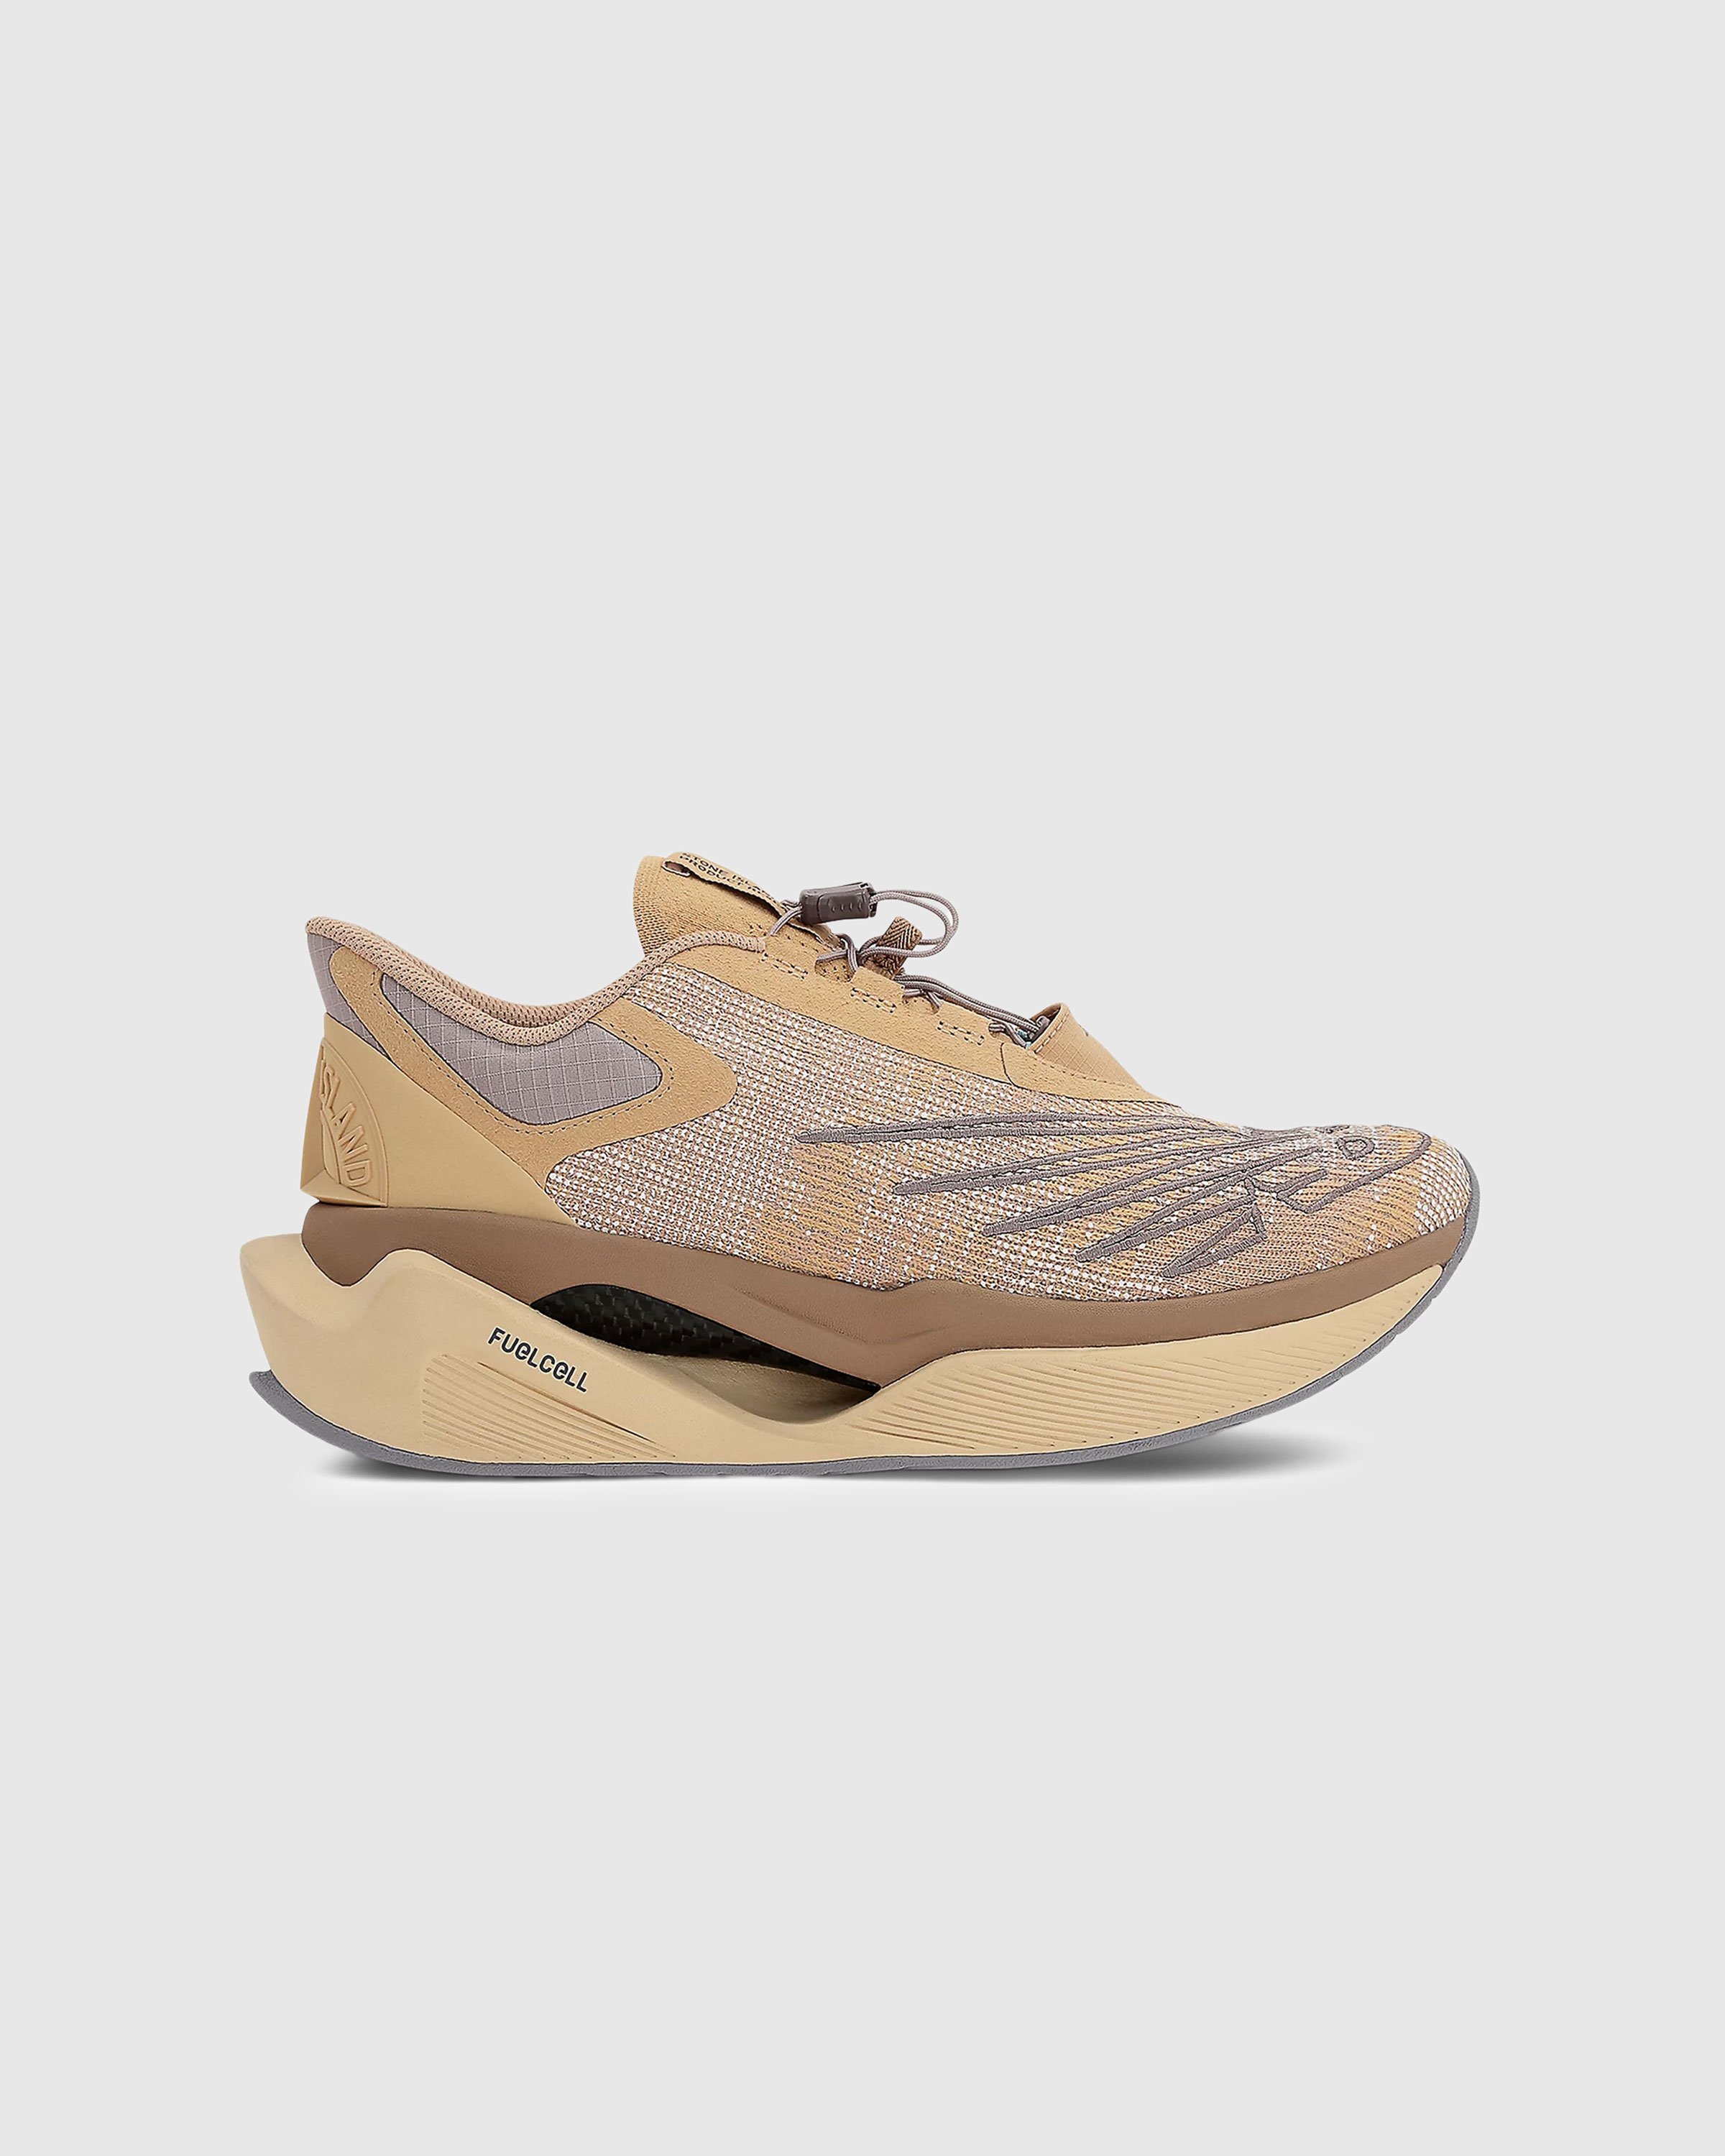 New Balance x Stone Island - TDS FuelCell C_1 Tan/Brown/Grey - Footwear - Brown - Image 1